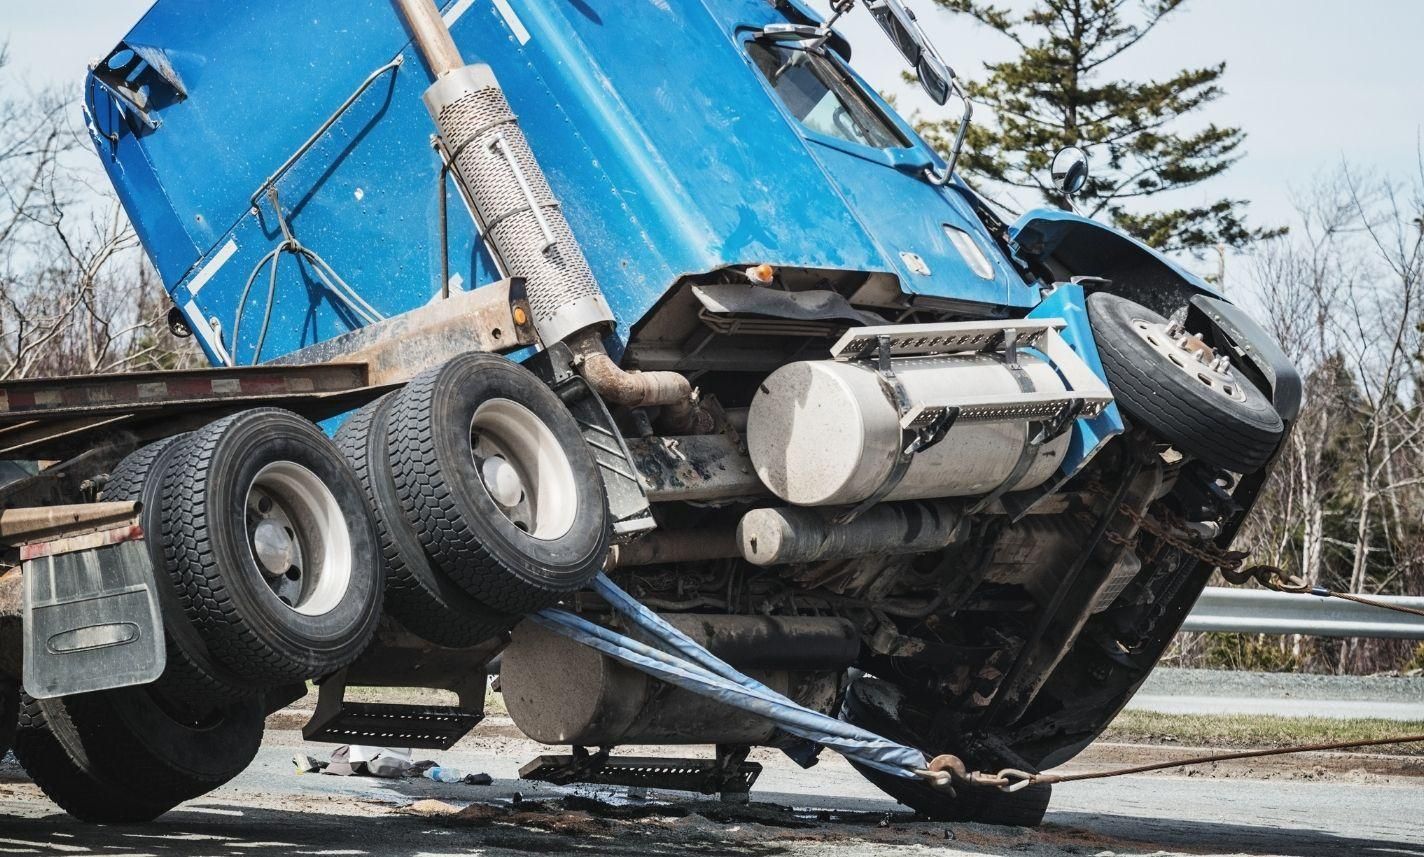 dutch-island-commercial-truck-accident-injury-lawyer